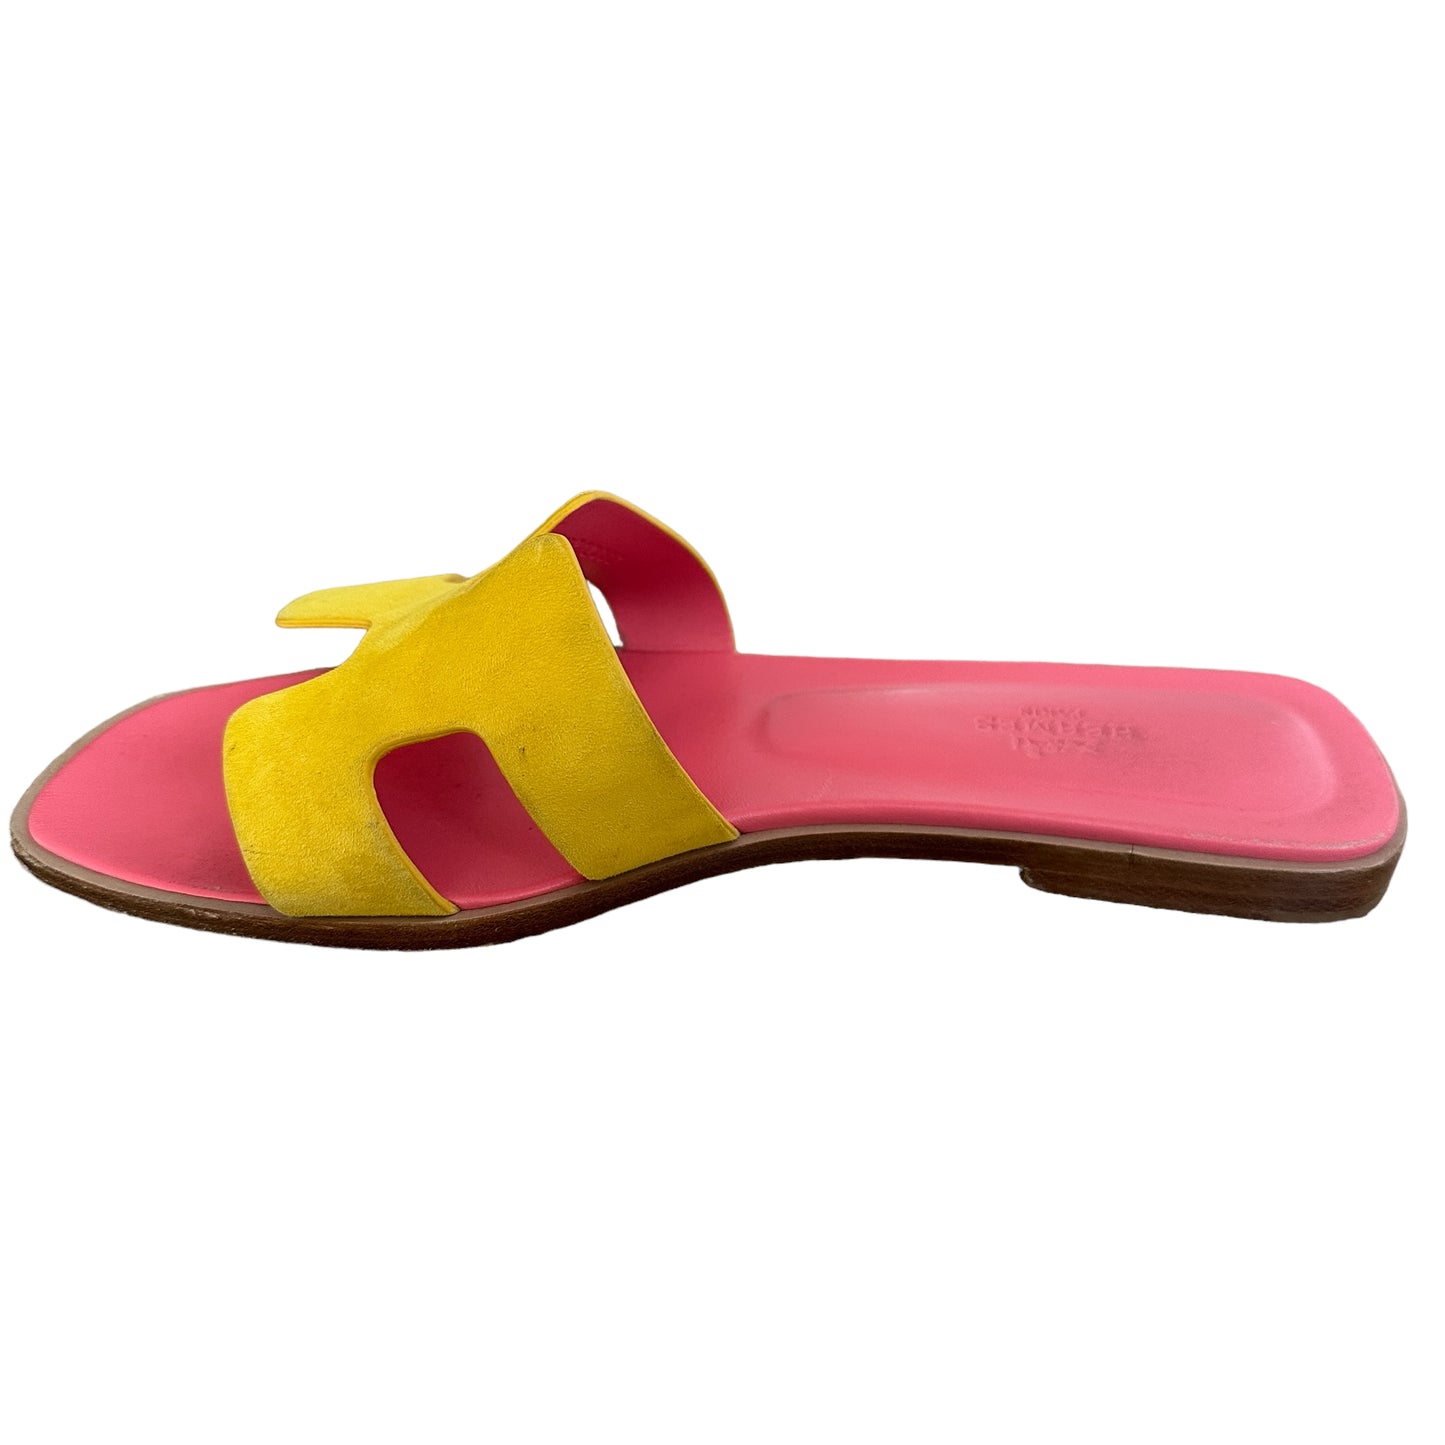 Yellow Suede & Pink Leather Oran Sandals - 8